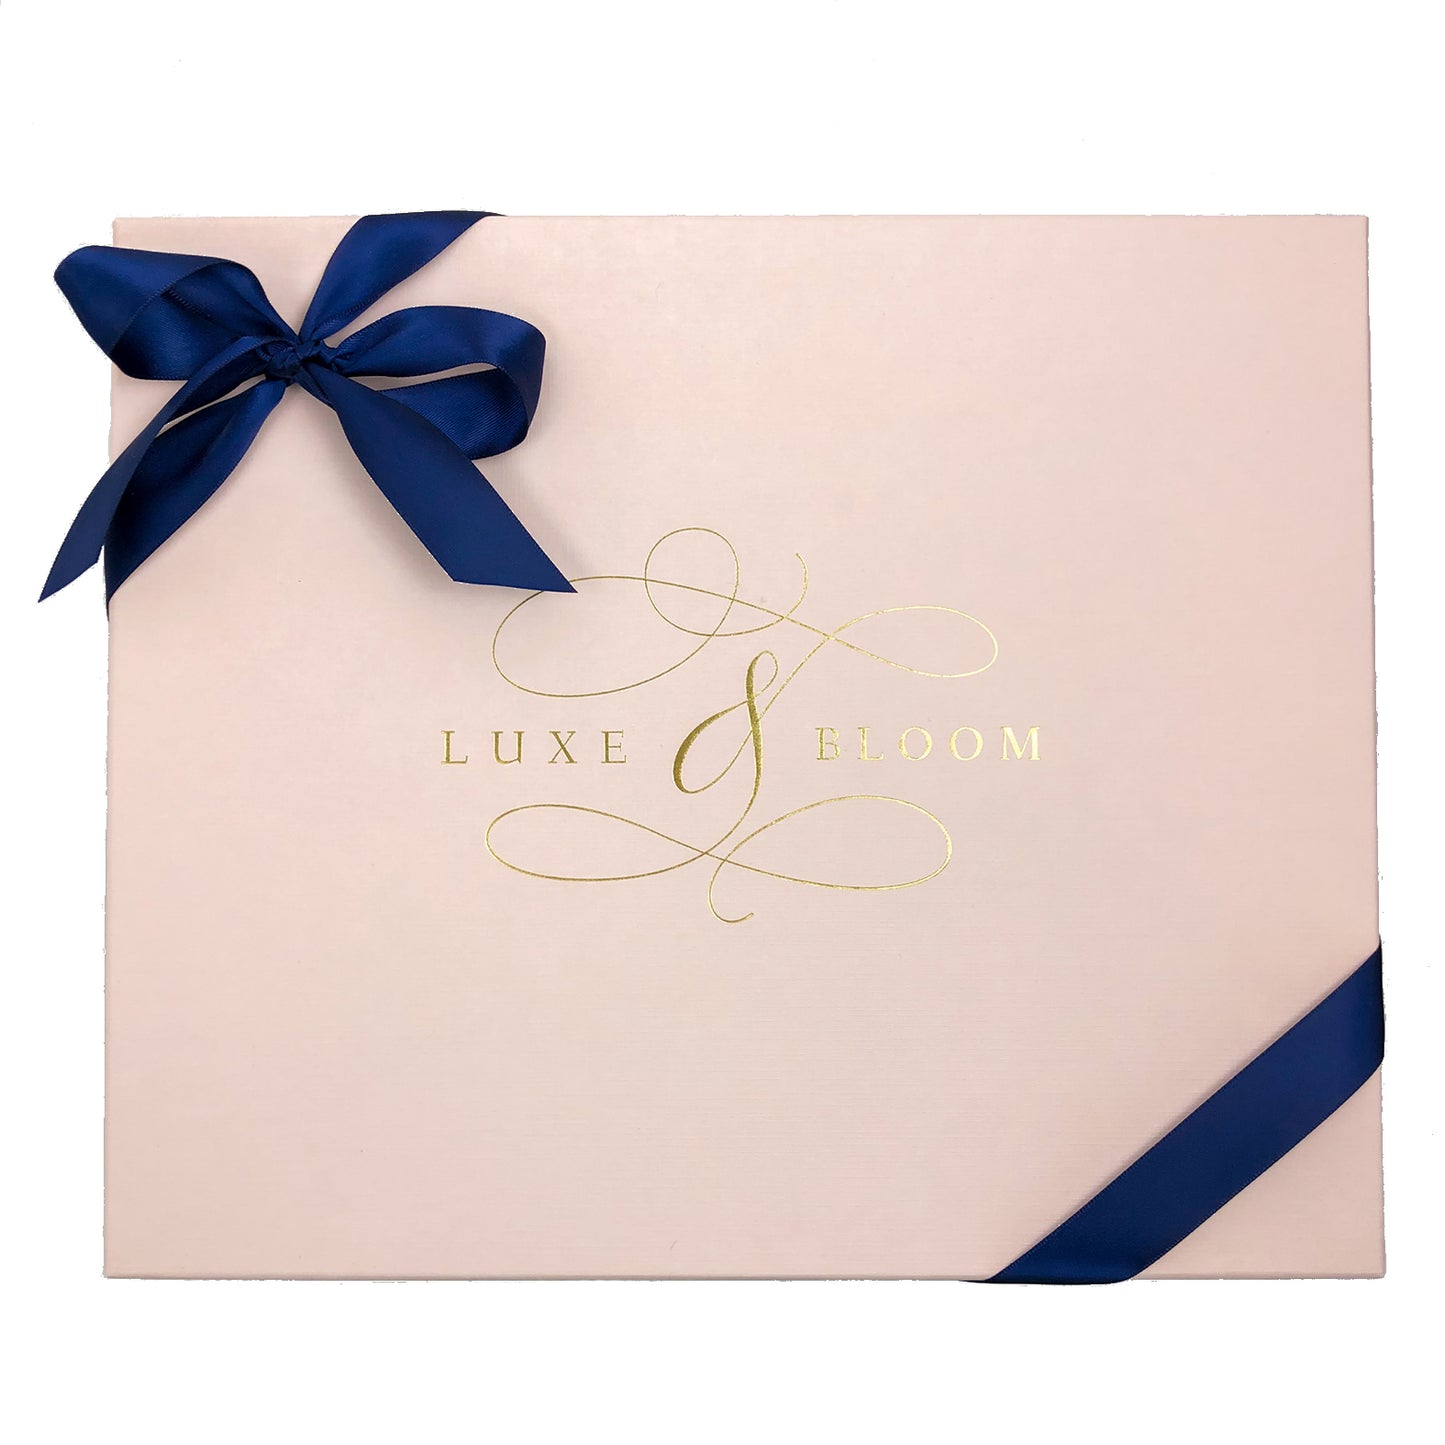 Luxe & Bloom Luxury Signature Blush Gift Box for Women